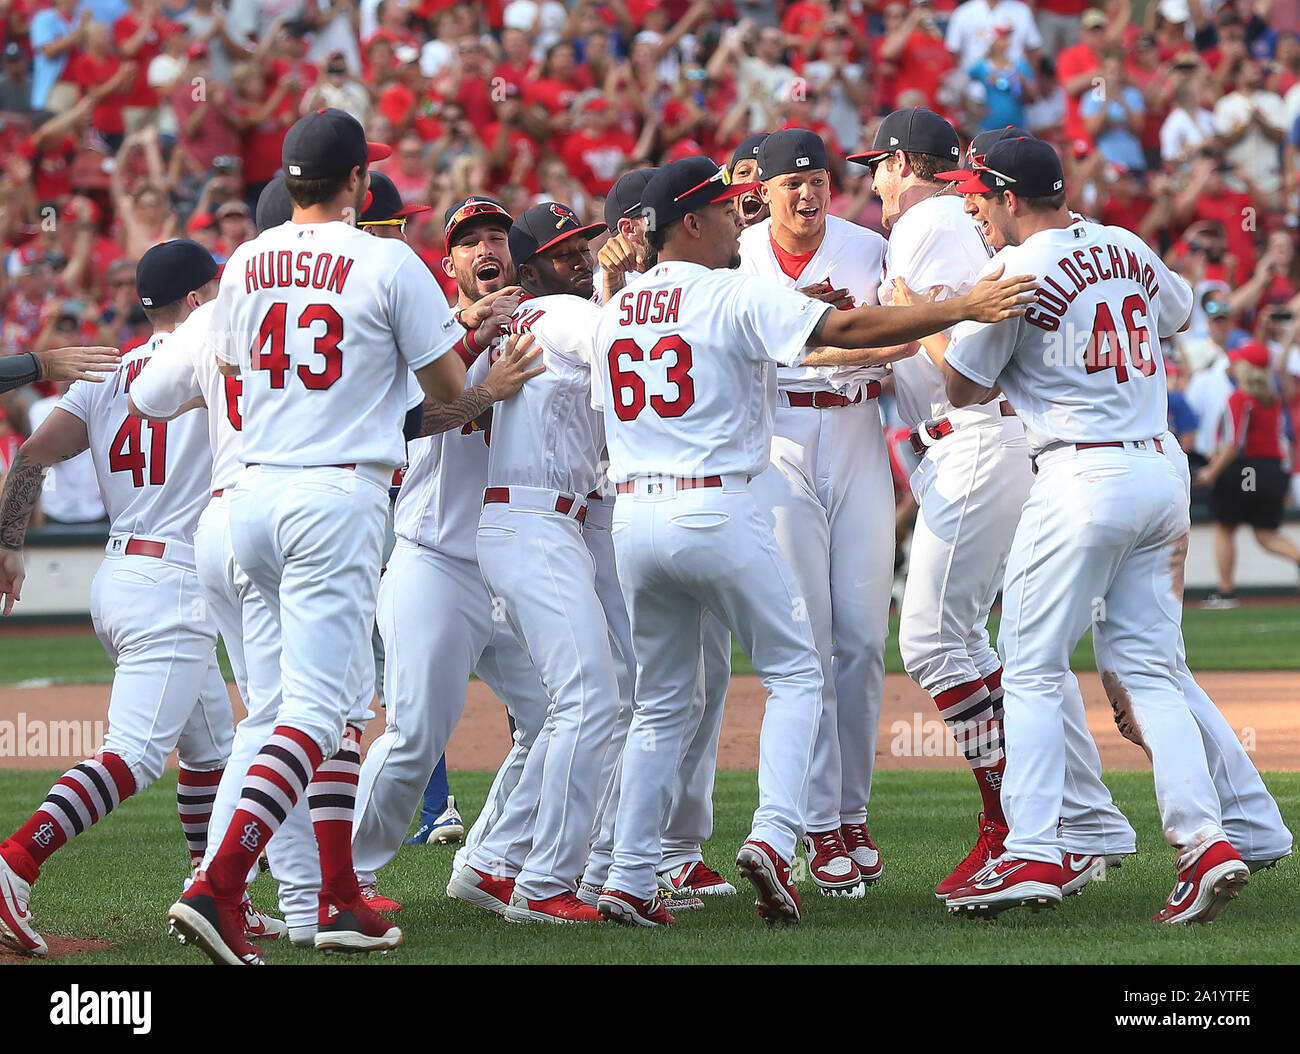 St. Louis, United States. 29th Sep, 2019. Members of the St. Louis Cardinals converge on the pitching mound after the third out against the Chicago Cubs, winning the National League Central Division at Busch Stadium in St. Louis on Sunday, September 29, 2019. Photo by BIll Greenblatt/UPI Credit: UPI/Alamy Live News Stock Photo